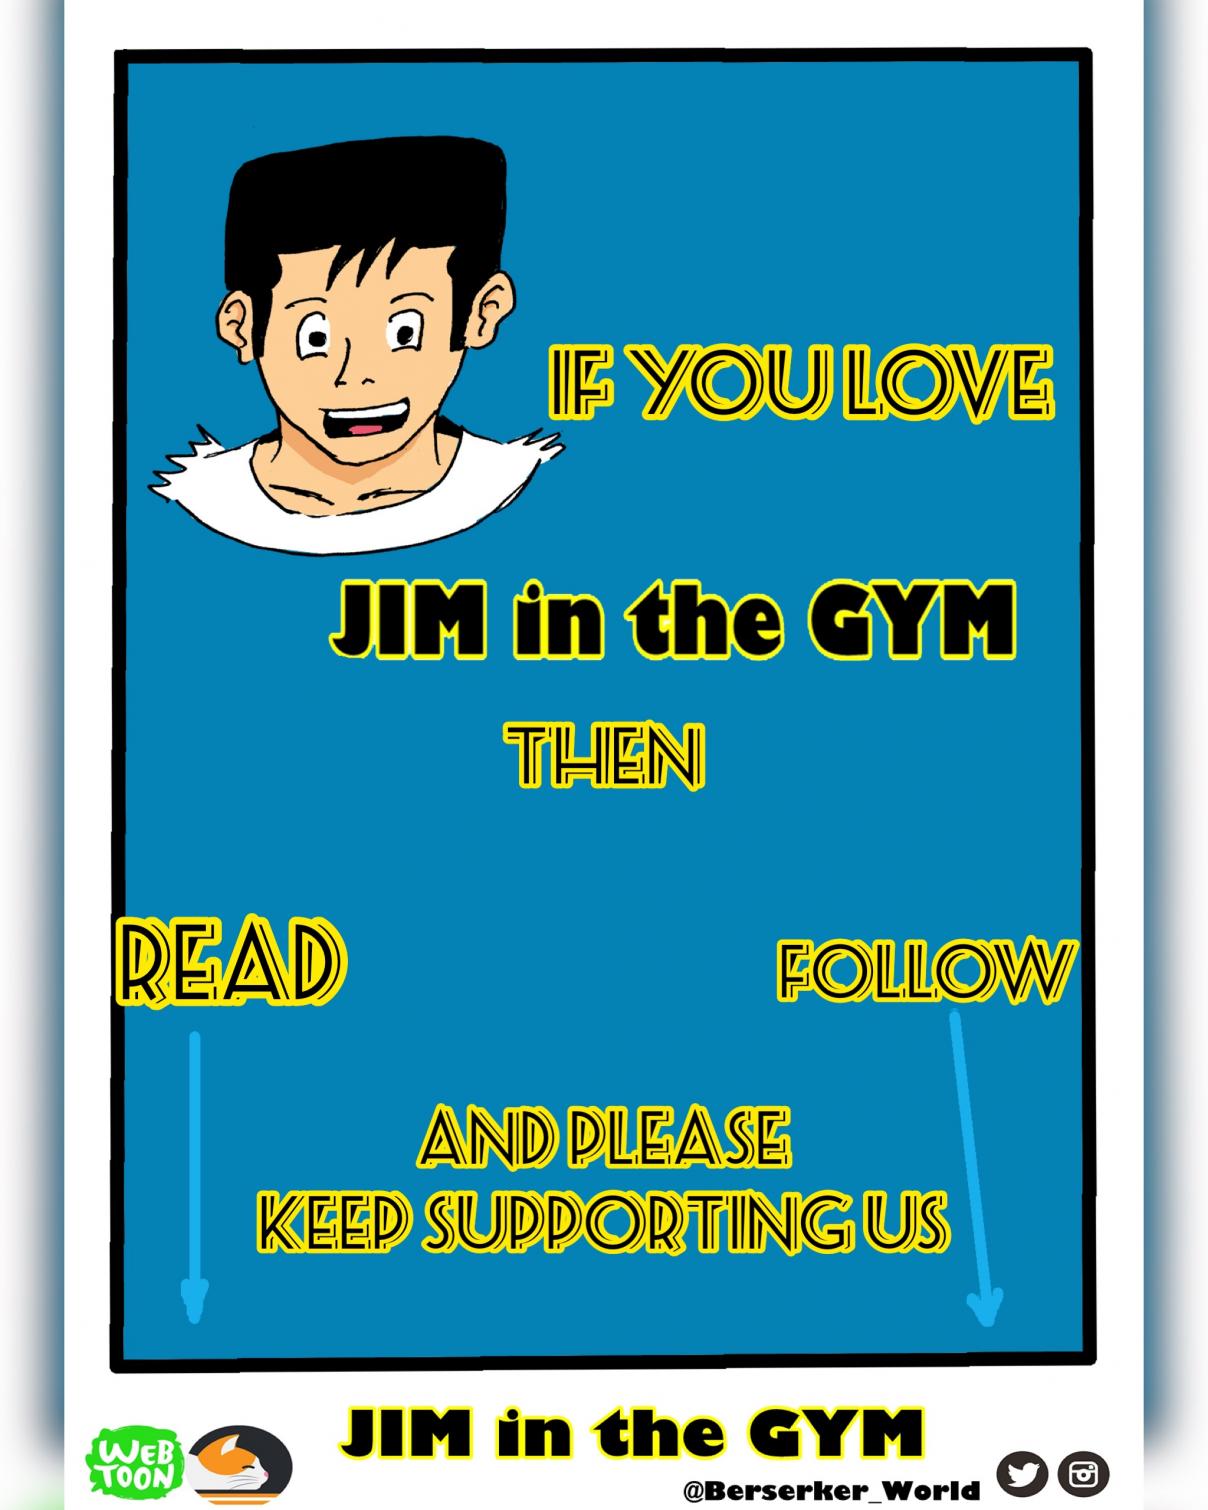 Jim in the Gym Vol. 1 Ch. 7 Insta Gym Fitness Accounts